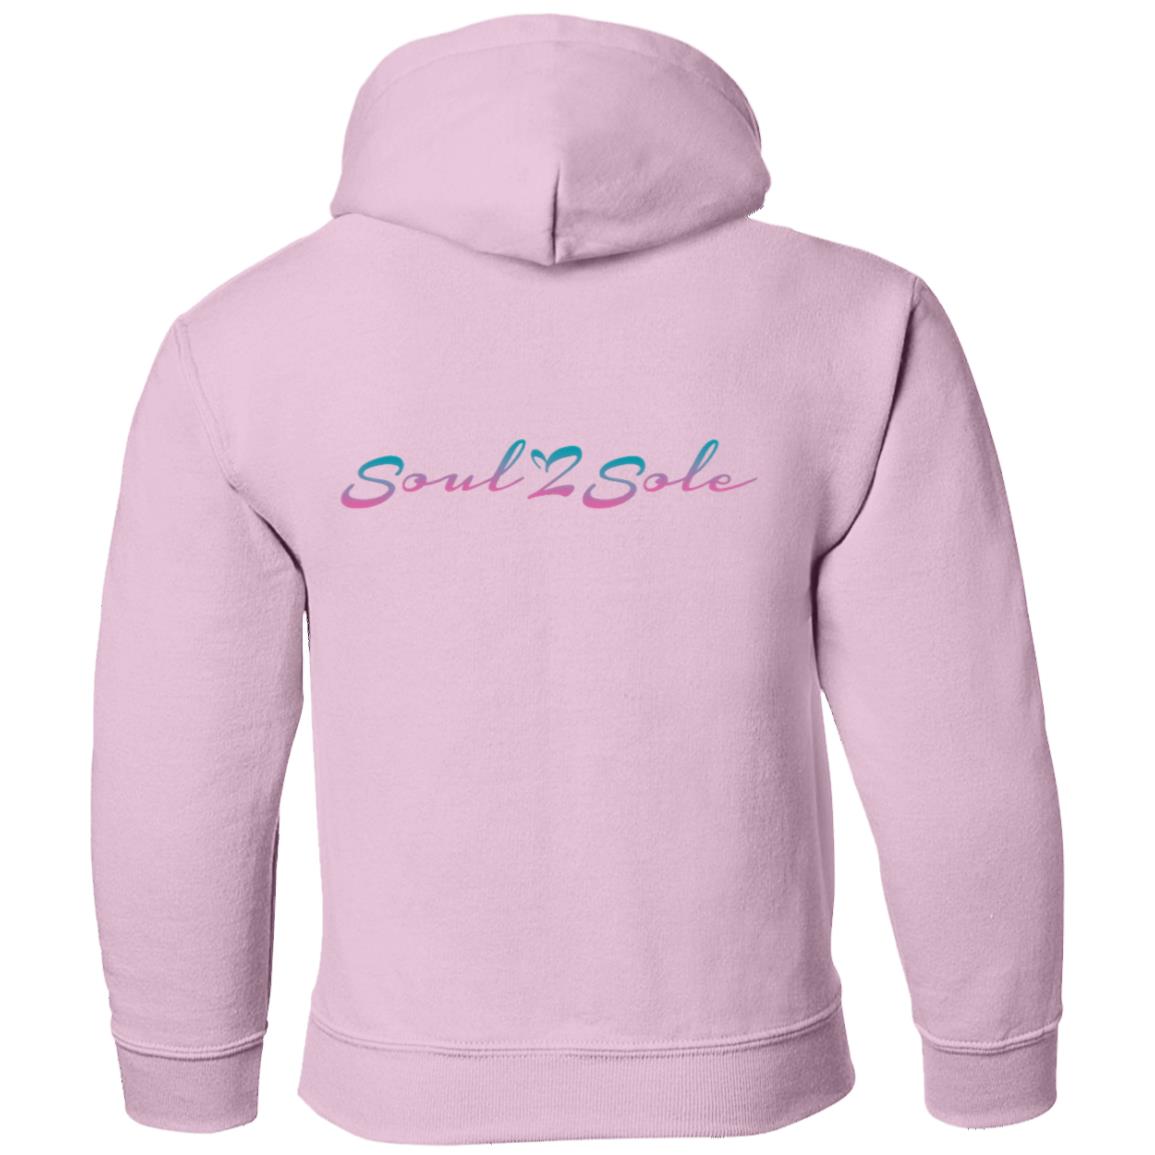 S2S personalized Youth Pullover Hoodie